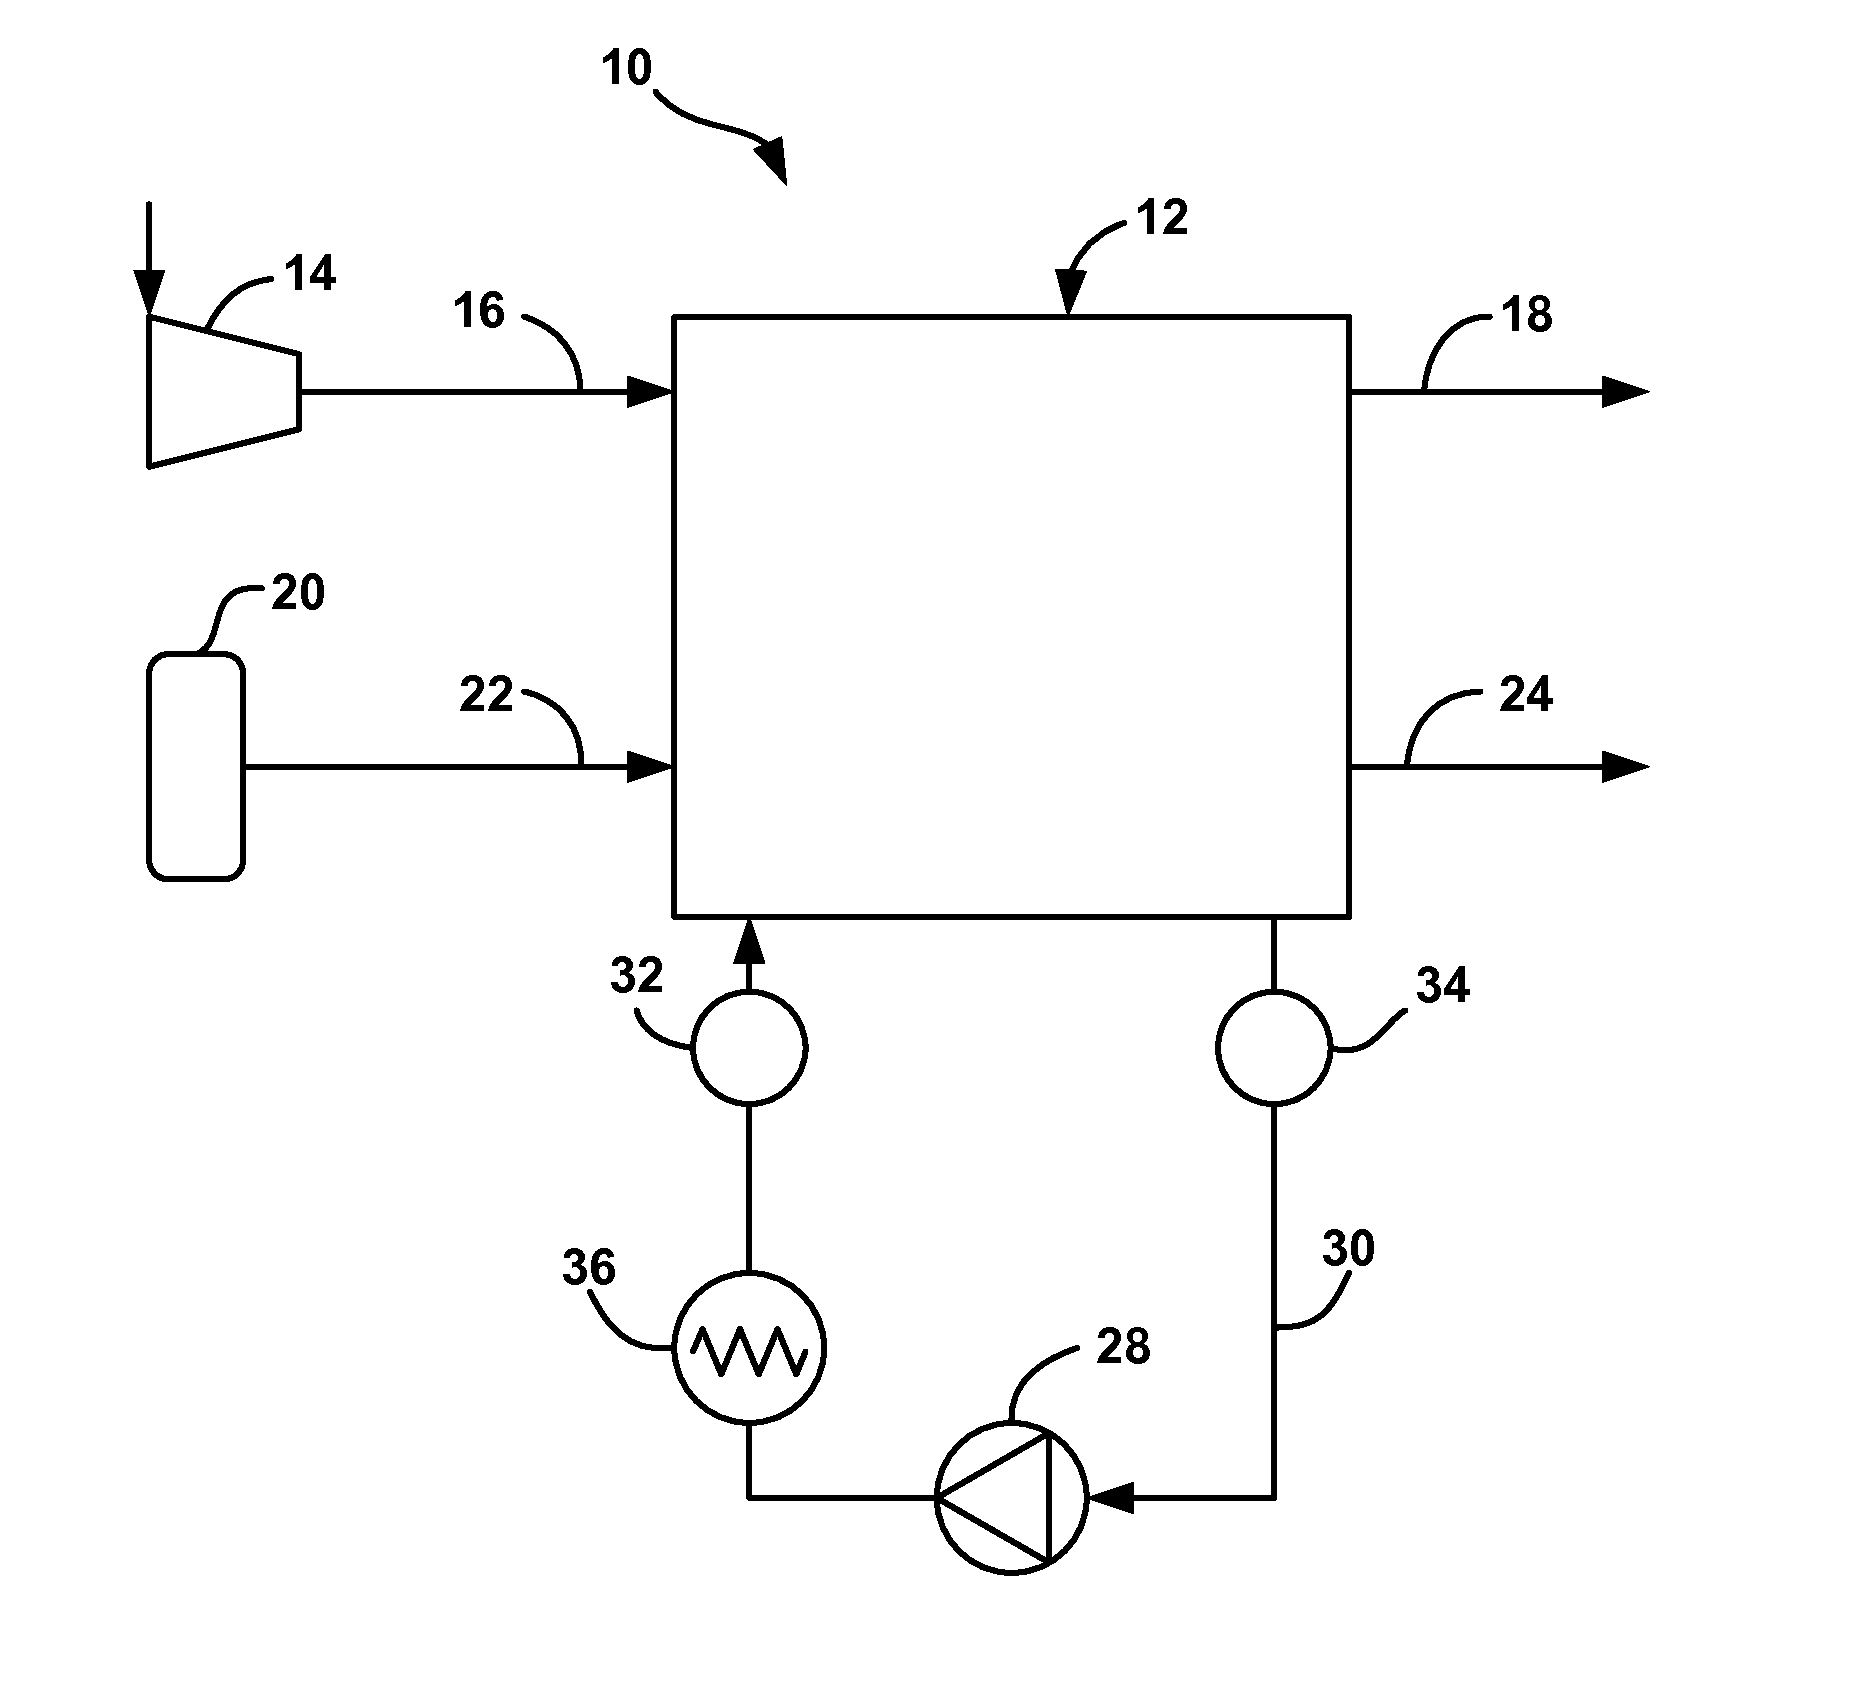 Method to thaw frozen coolant in a fuel cell system